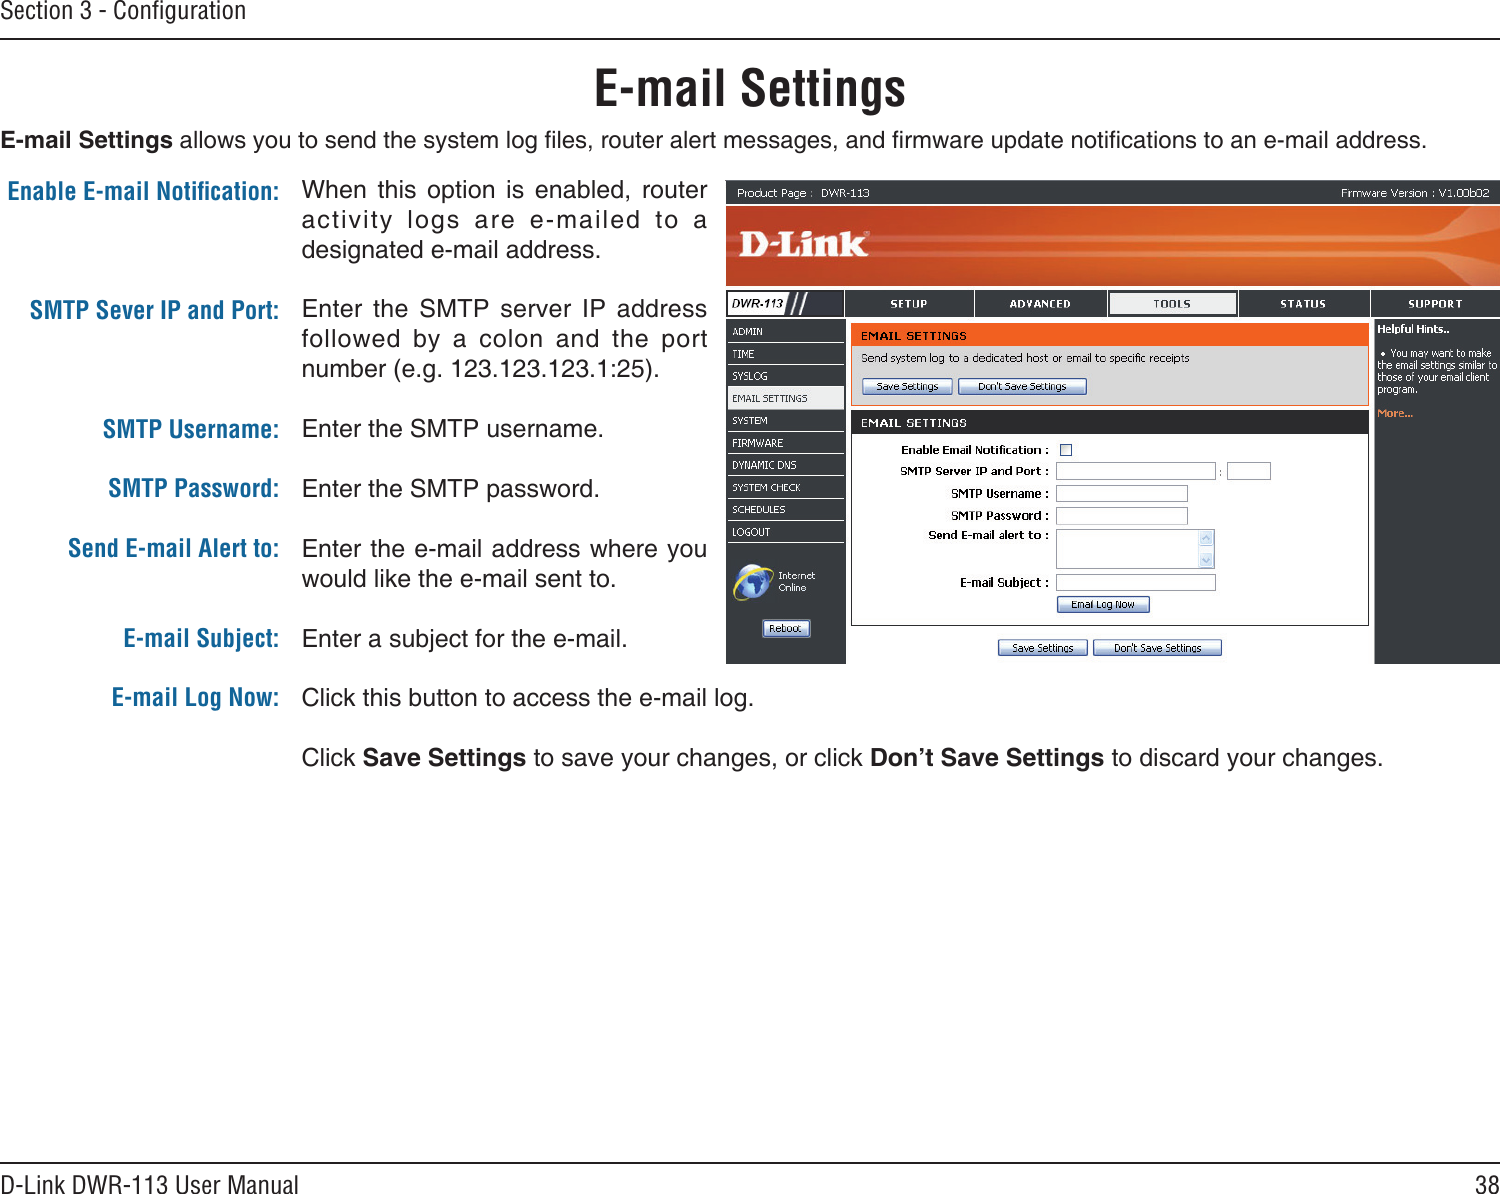 38D-Link DWR-113 User ManualSection 3 - ConﬁgurationE-mail SettingsWhen  this  option  is  enabled,  router activity  logs  are  e-mailed  to  a designated e-mail address.Enter  the  SMTP  server  IP  address followed  by  a  colon  and  the  port number (e.g. 123.123.123.1:25).Enter the SMTP username.Enter the SMTP password.Enter the e-mail address where you would like the e-mail sent to.Enter a subject for the e-mail.Click this button to access the e-mail log.Click Save Settings to save your changes, or click Don’t Save Settings to discard your changes.Enable E-mail Notiﬁcation:SMTP Sever IP and Port:SMTP Username:SMTP Password:  Send E-mail Alert to: E-mail Subject:E-mail Log Now:E-mail Settings allows you to send the system log les, router alert messages, and rmware update notications to an e-mail address.